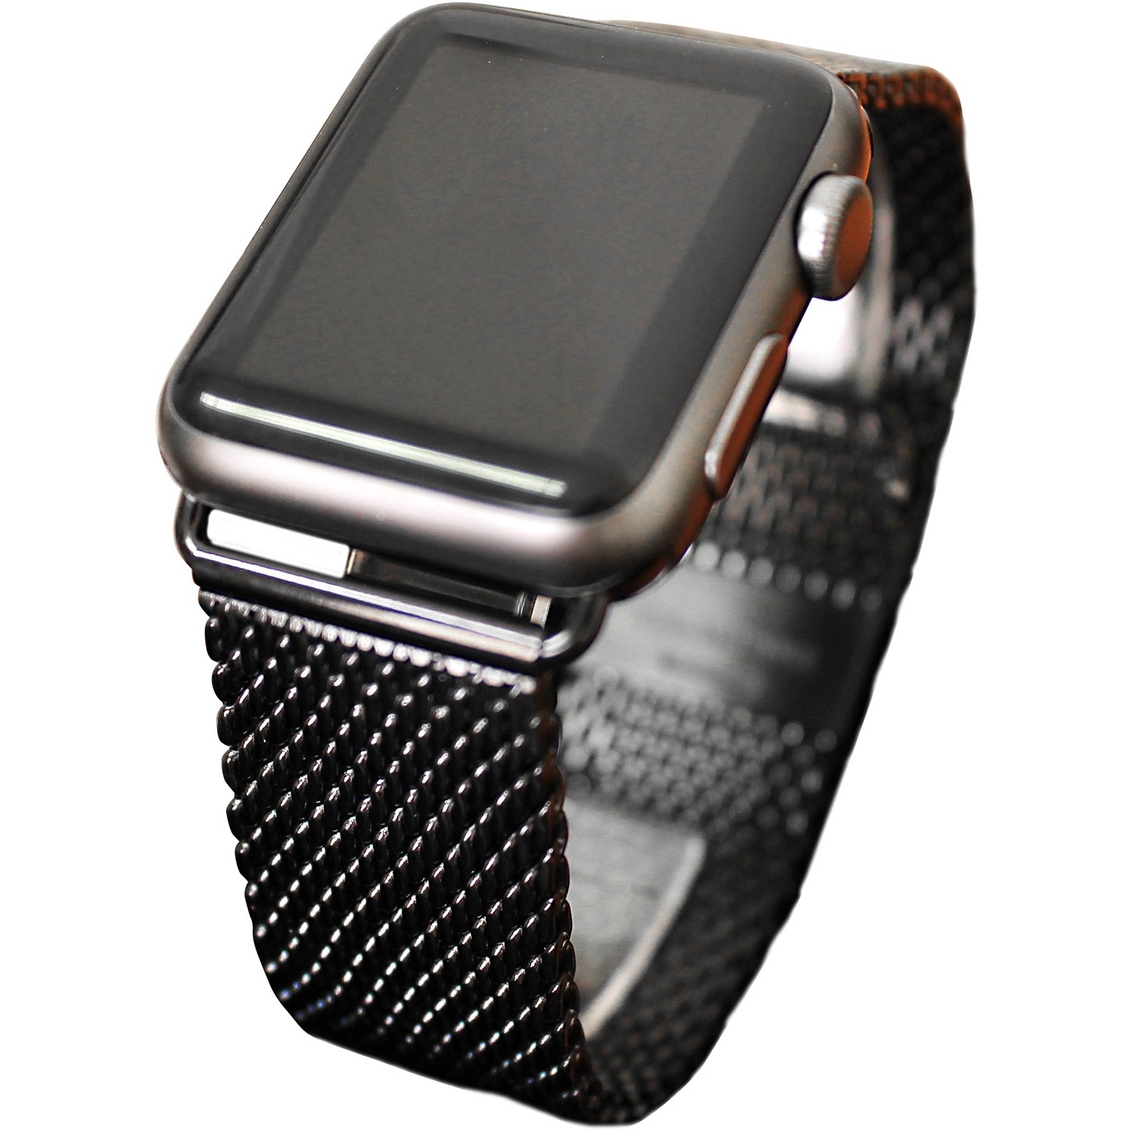 iBand Pro Mesh Link Watchband for Apple Watches - Image 2 of 3